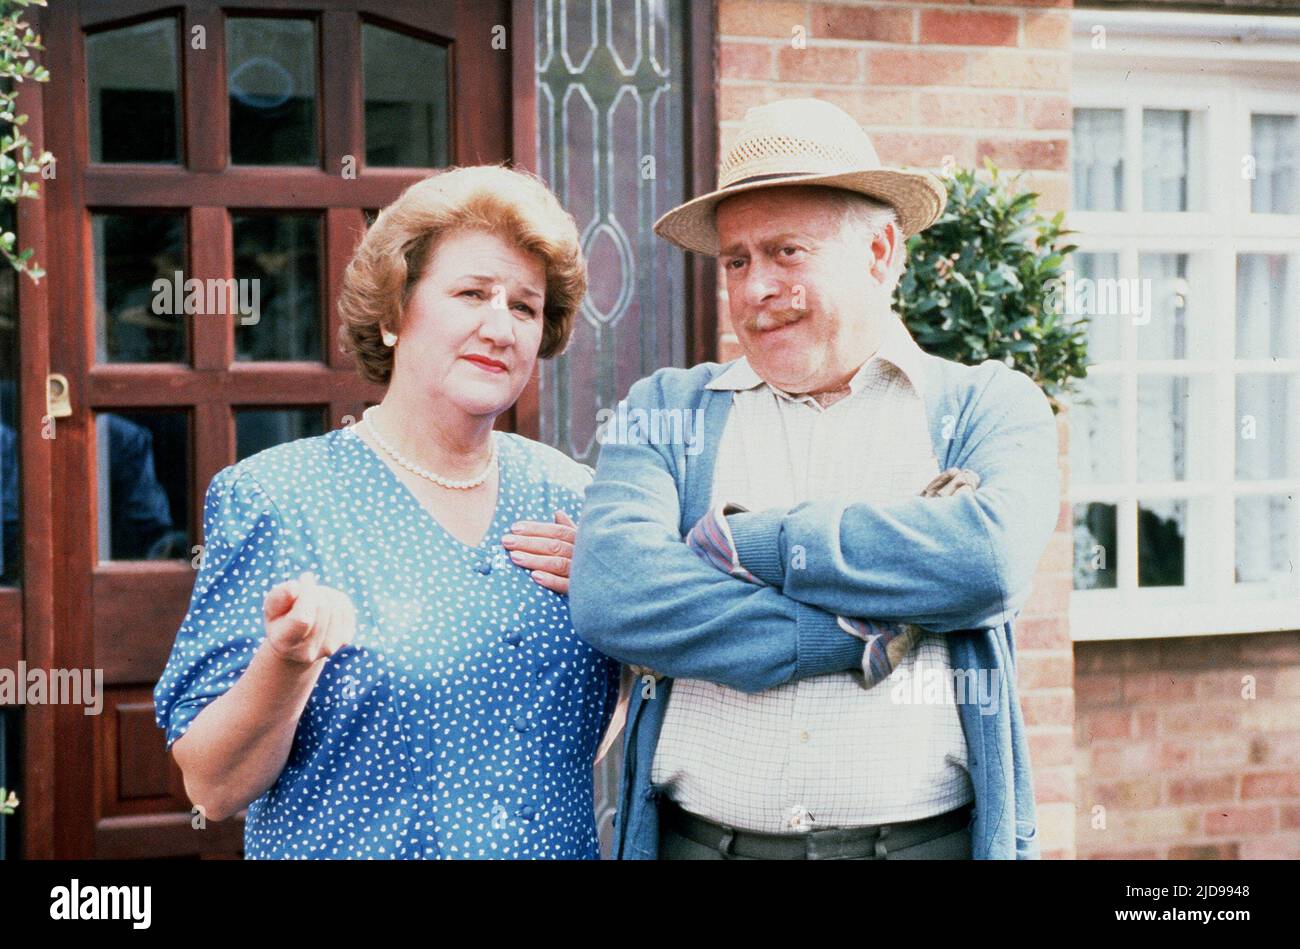 ROUTLEDGE,SWIFT, KEEPING UP APPEARANCES, 1990, Stock Photo